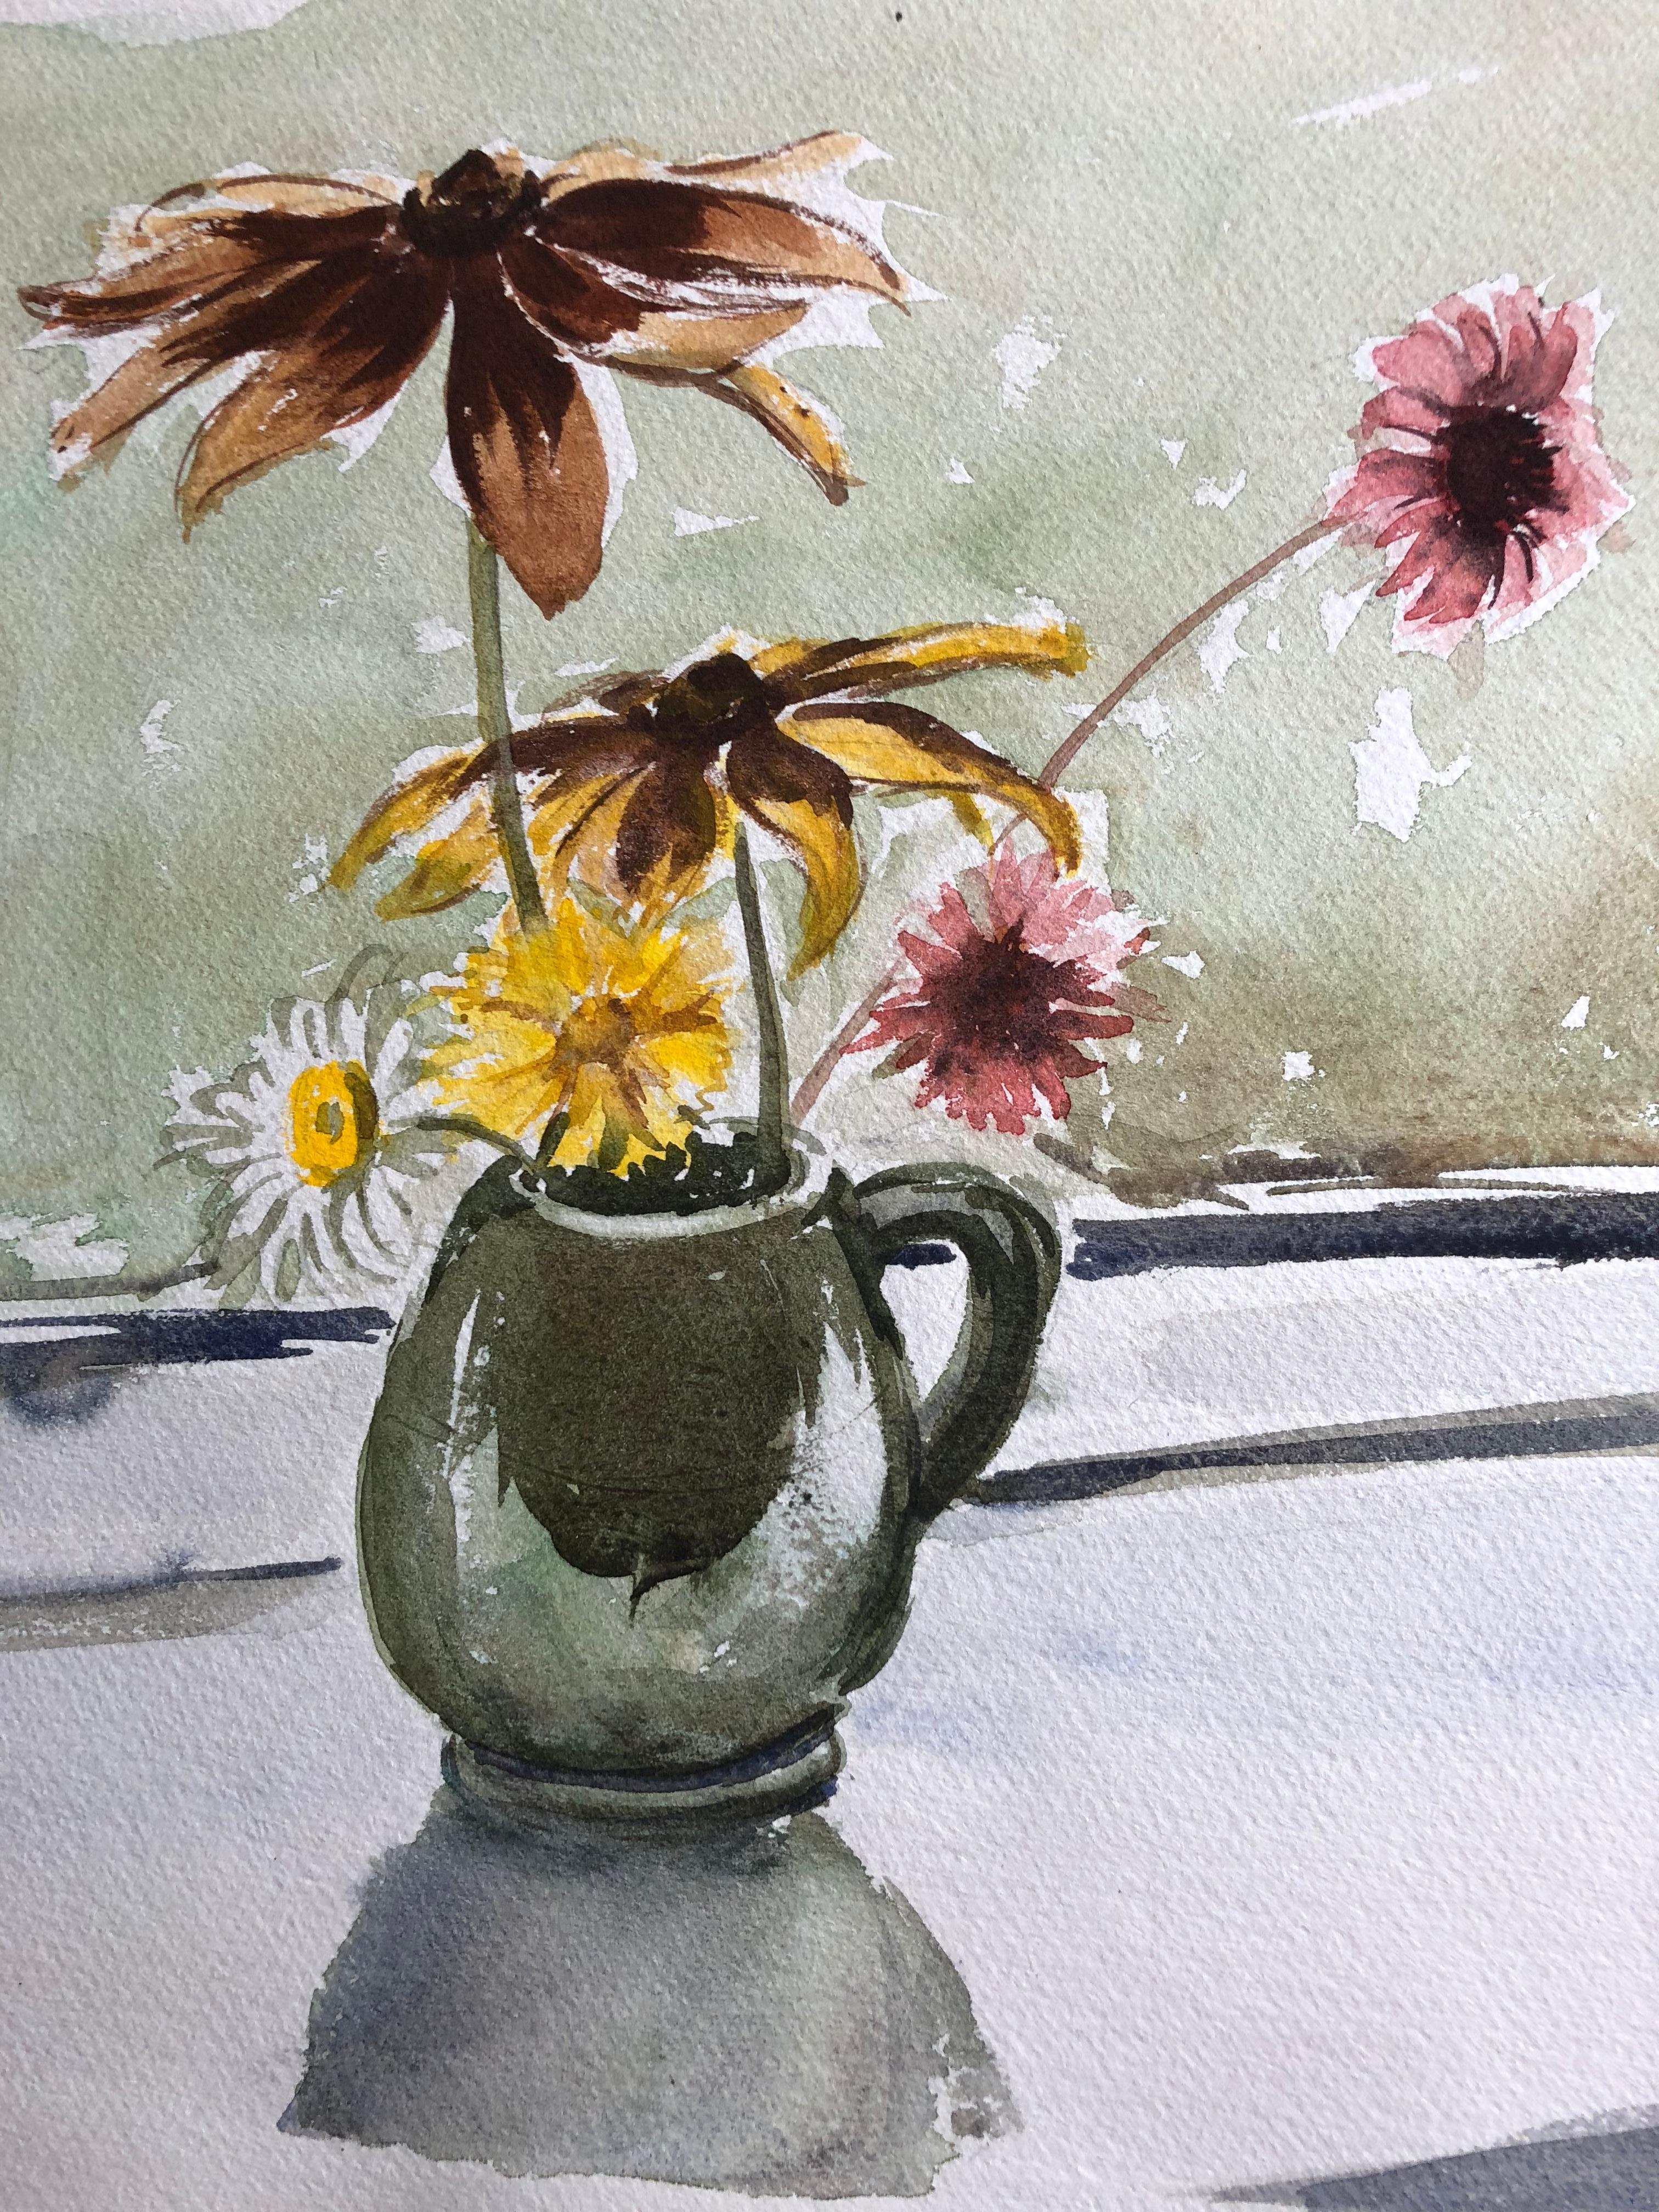 Vase of Flowers
by Ronald Birch, British circa 1970's.
Watercolour on art paper, unframed,
overall paper measures: 15 x 21.75 inches.

*Free shipping on this painting*: American, Europe & United Kingdom

Lovely original watercolour painting